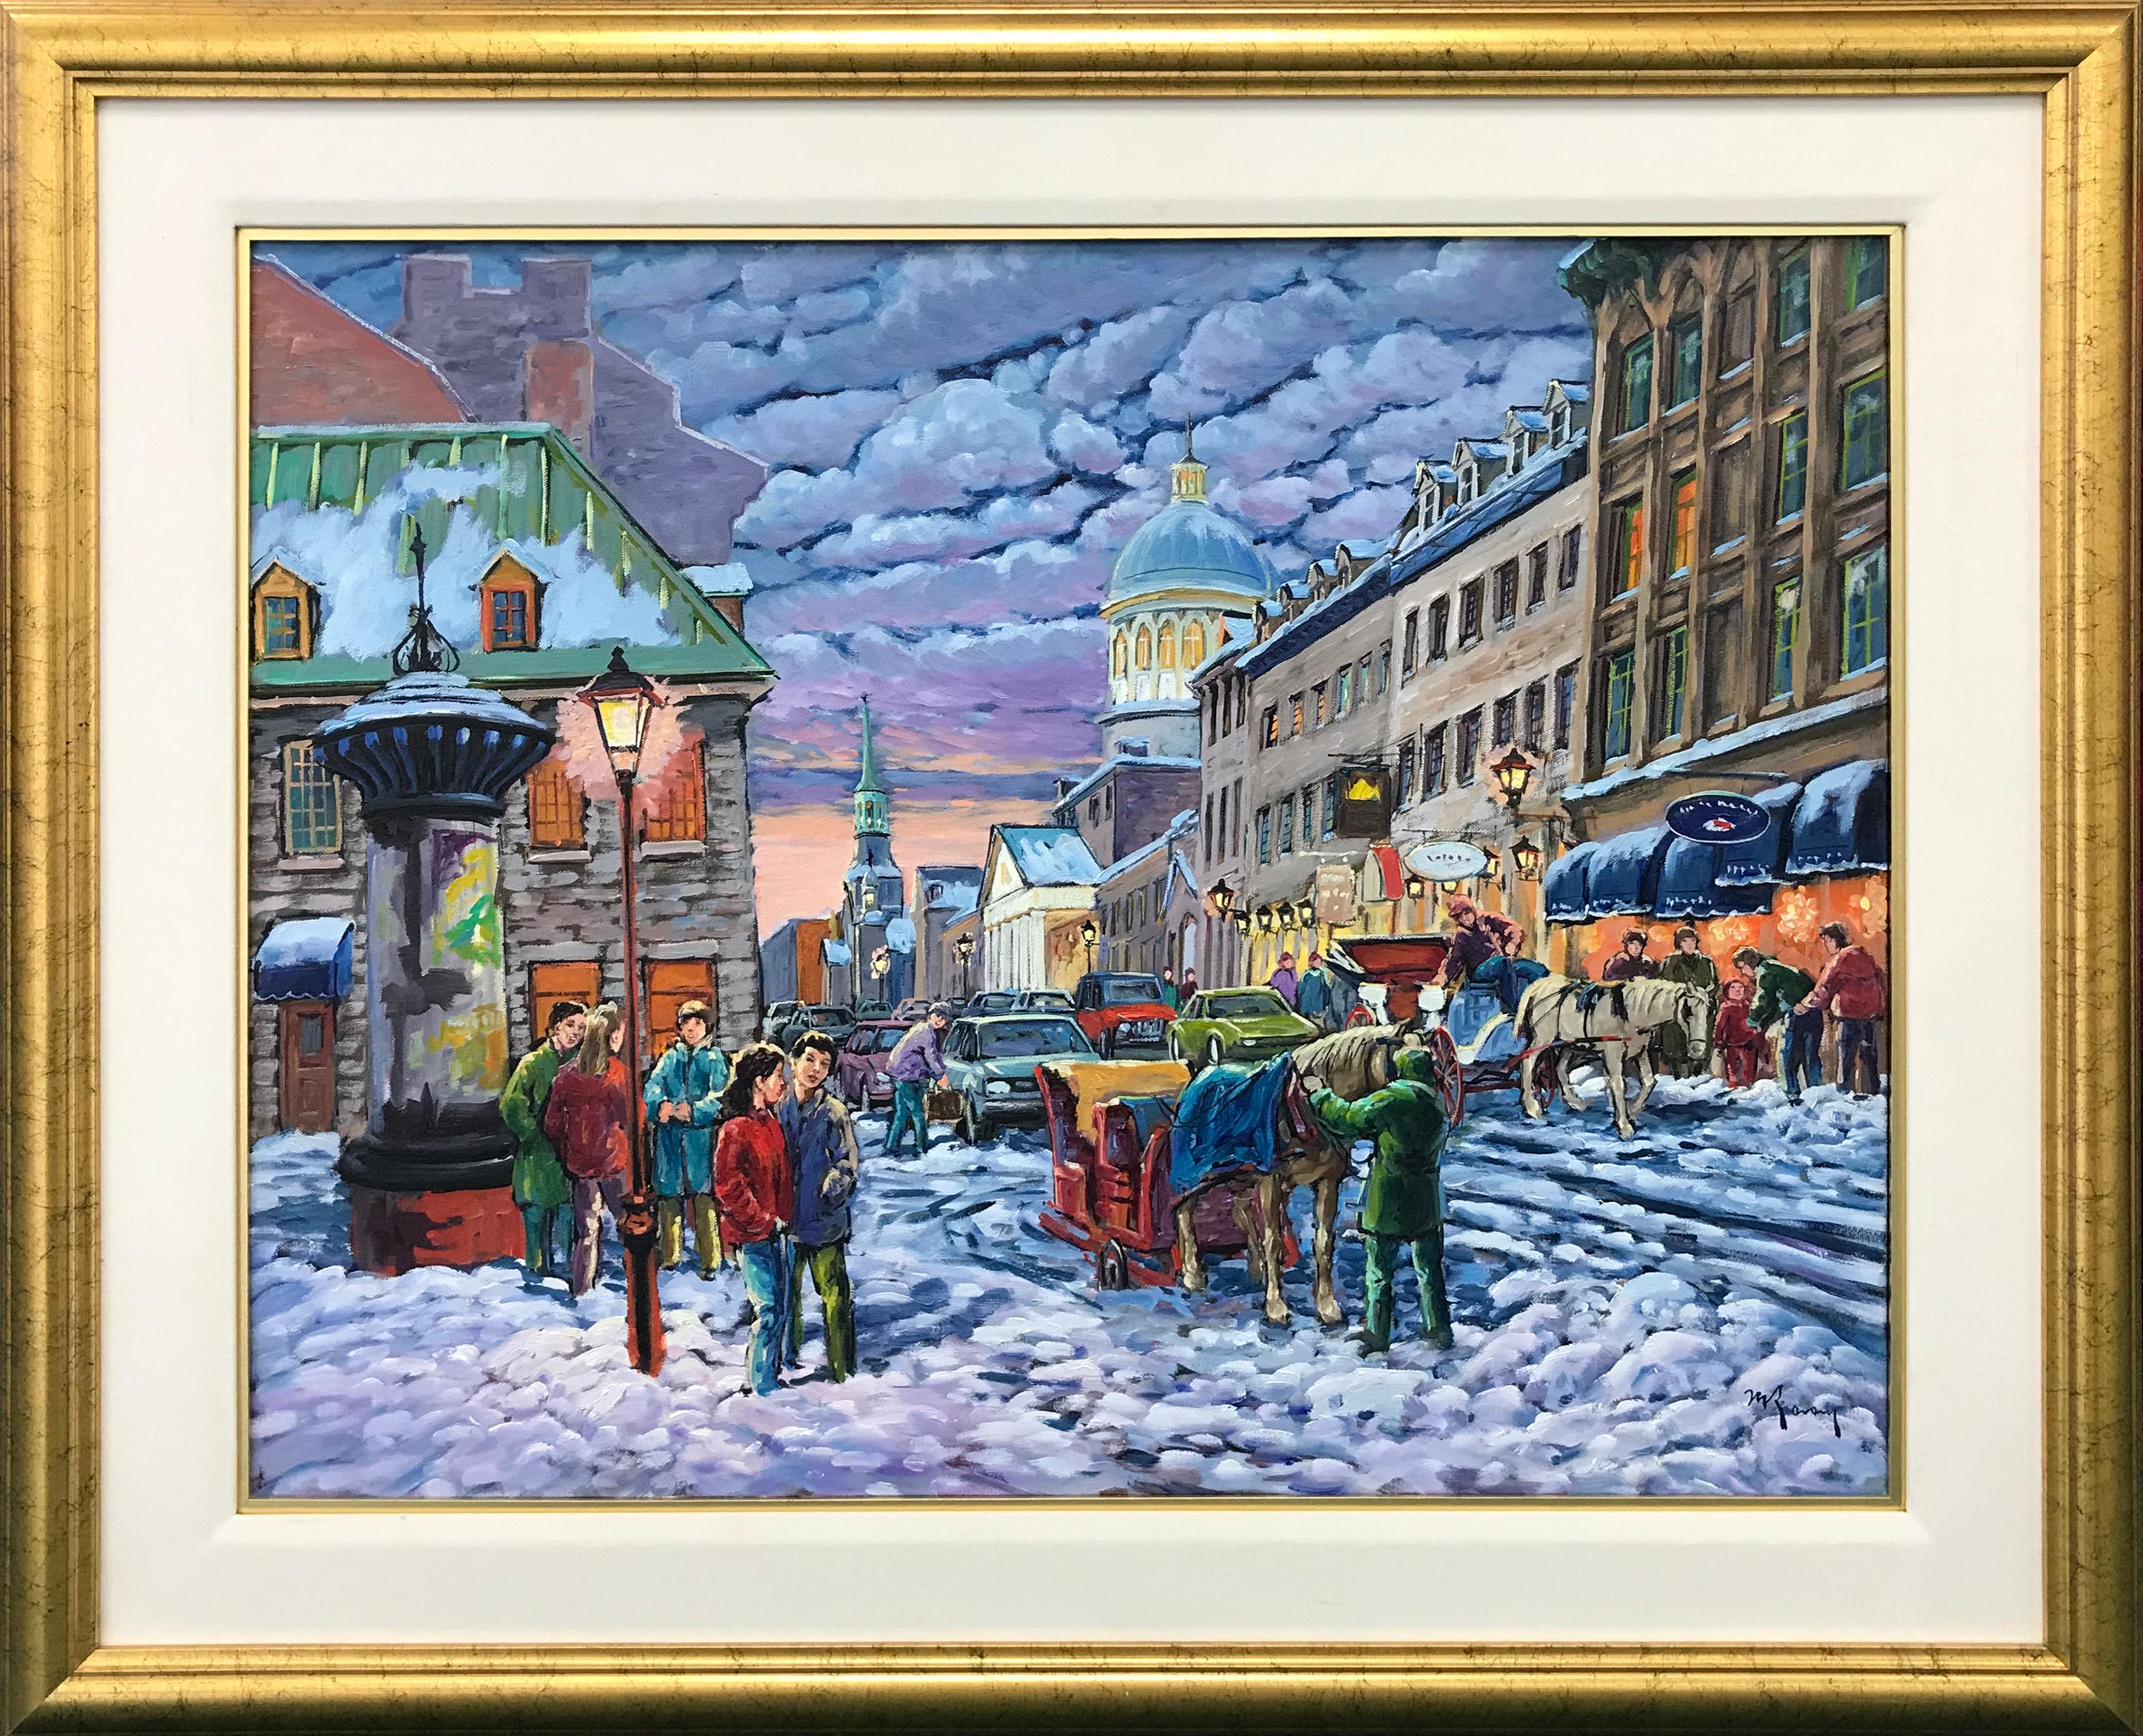 OLD MONTREAL - Painting by Marcel Ravary